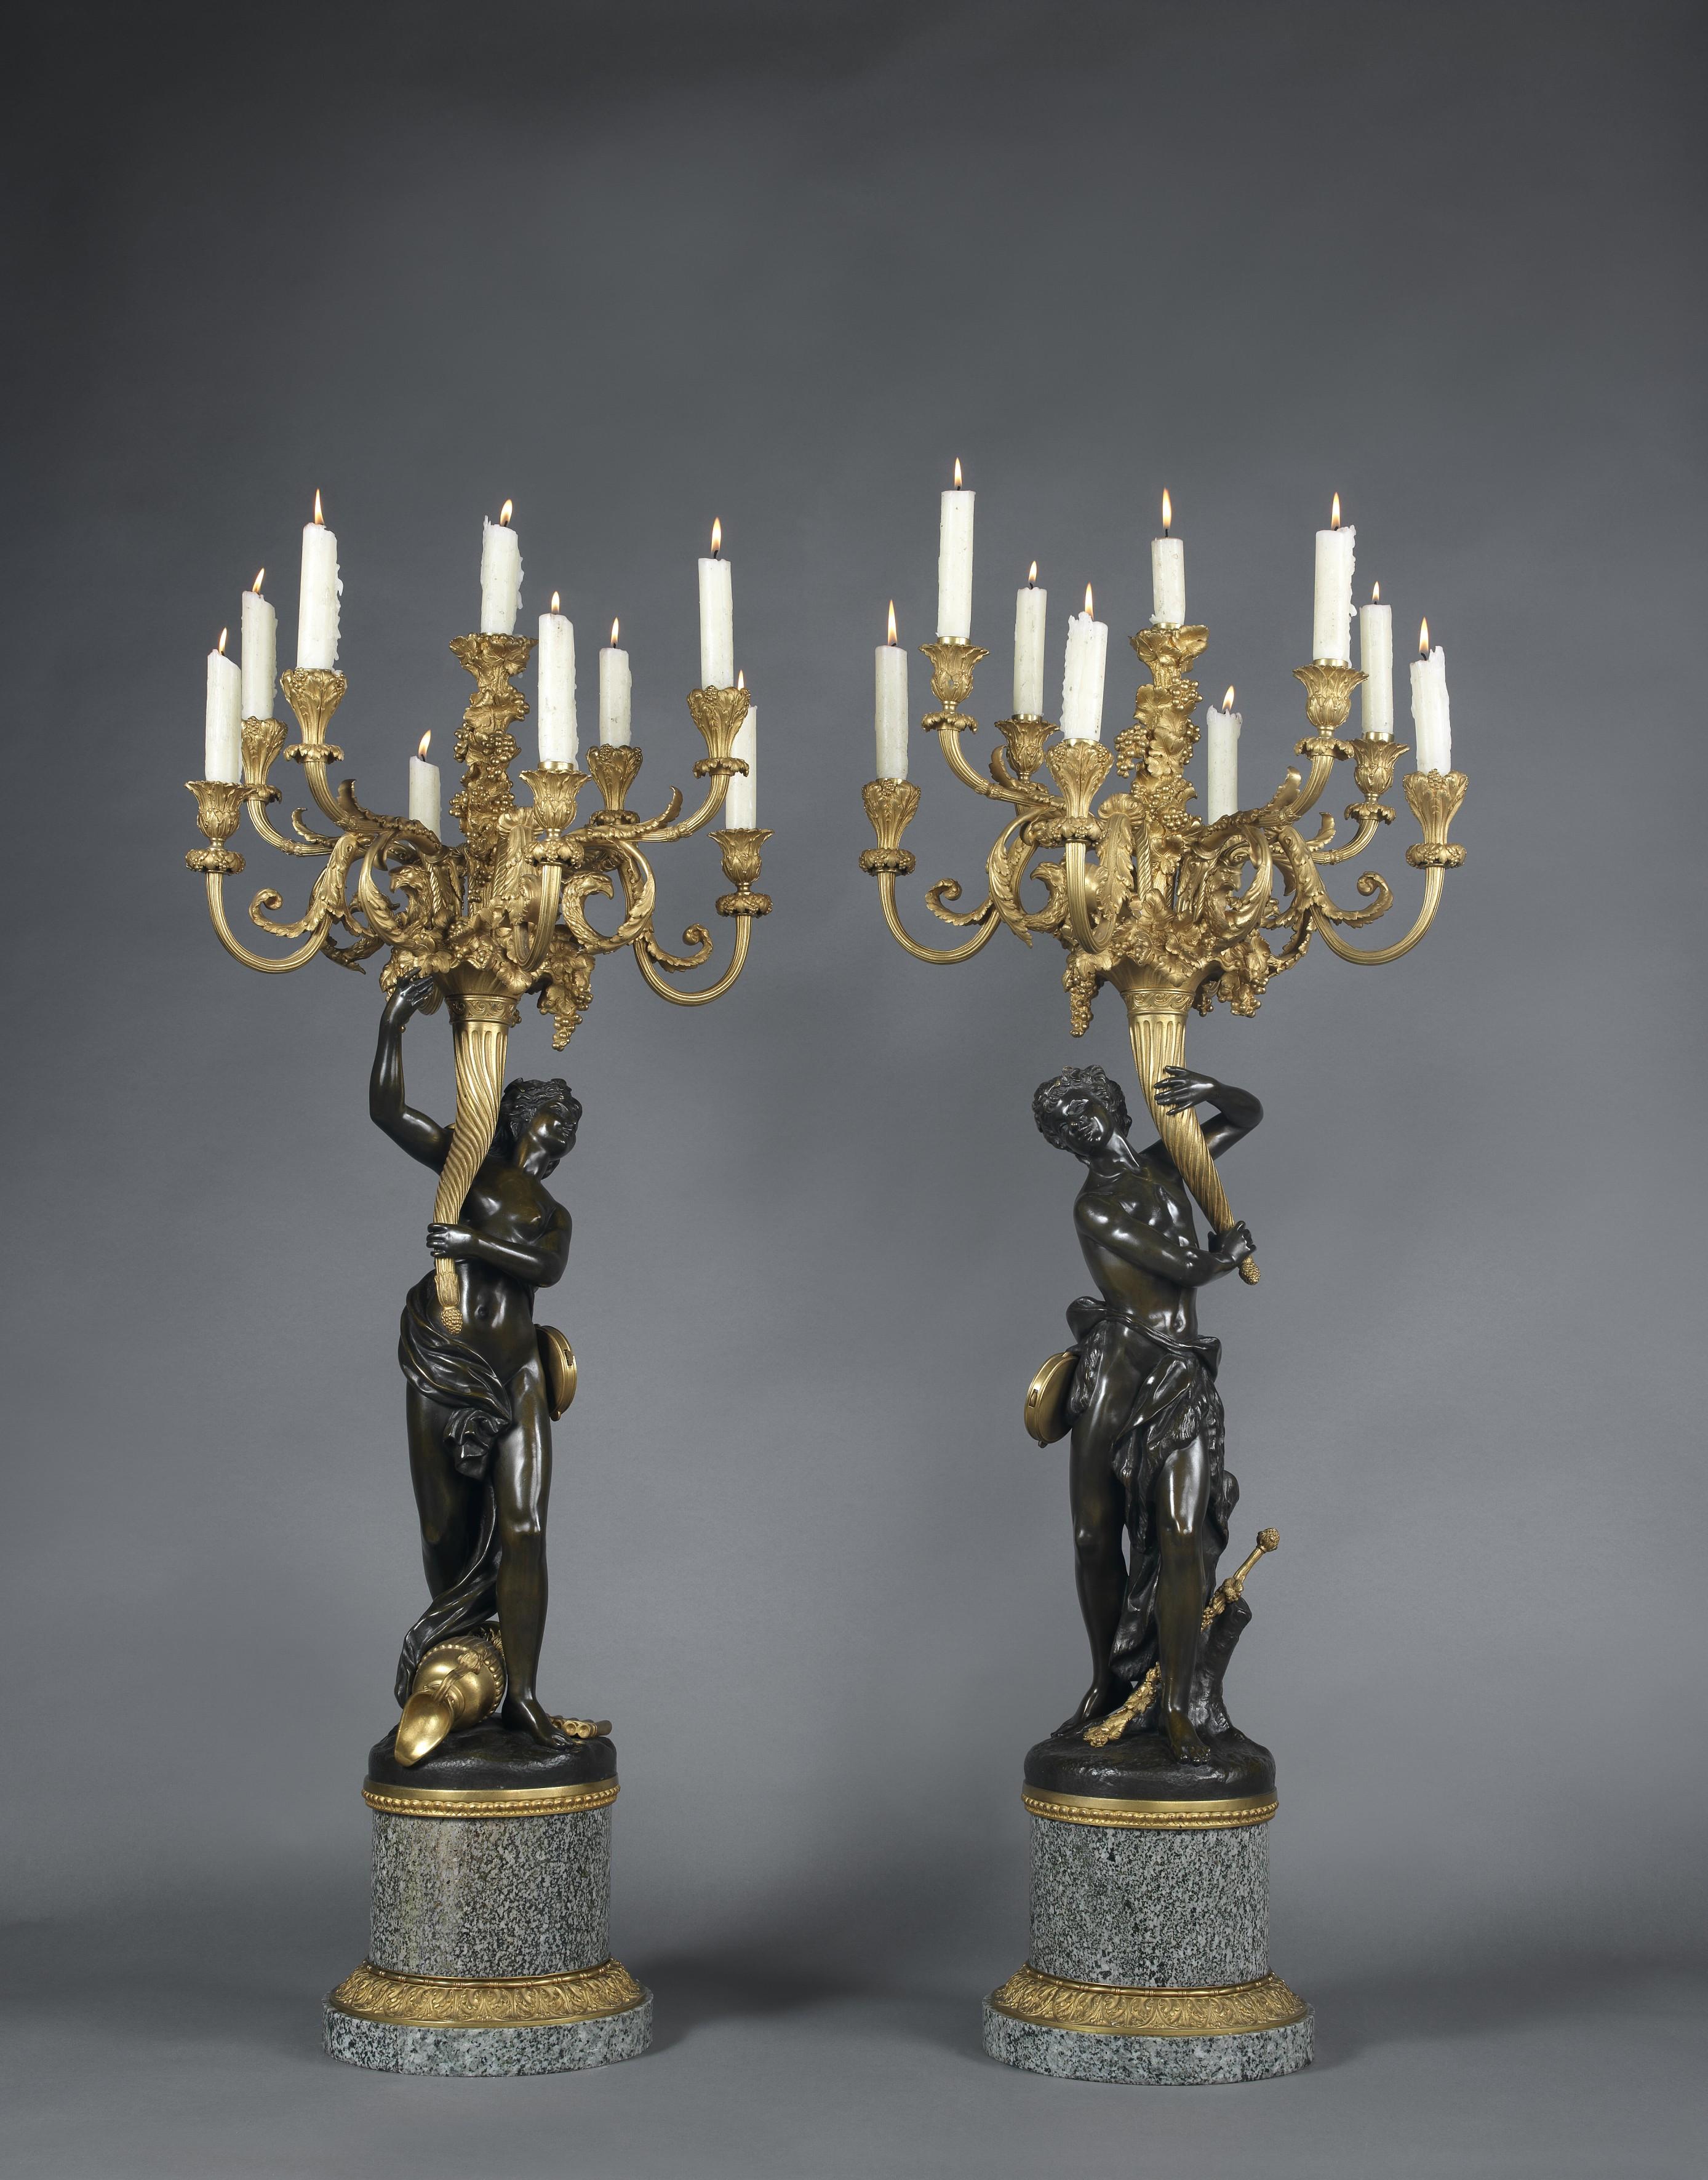 ‘Les Grands Faunes’, a large and very finely cast pair of gilt bronze and patinated bronze figural candelabra on green granite marble bases, after a model by François Rémond.

French, circa 1880.

The candelabra are in the form of a patinated